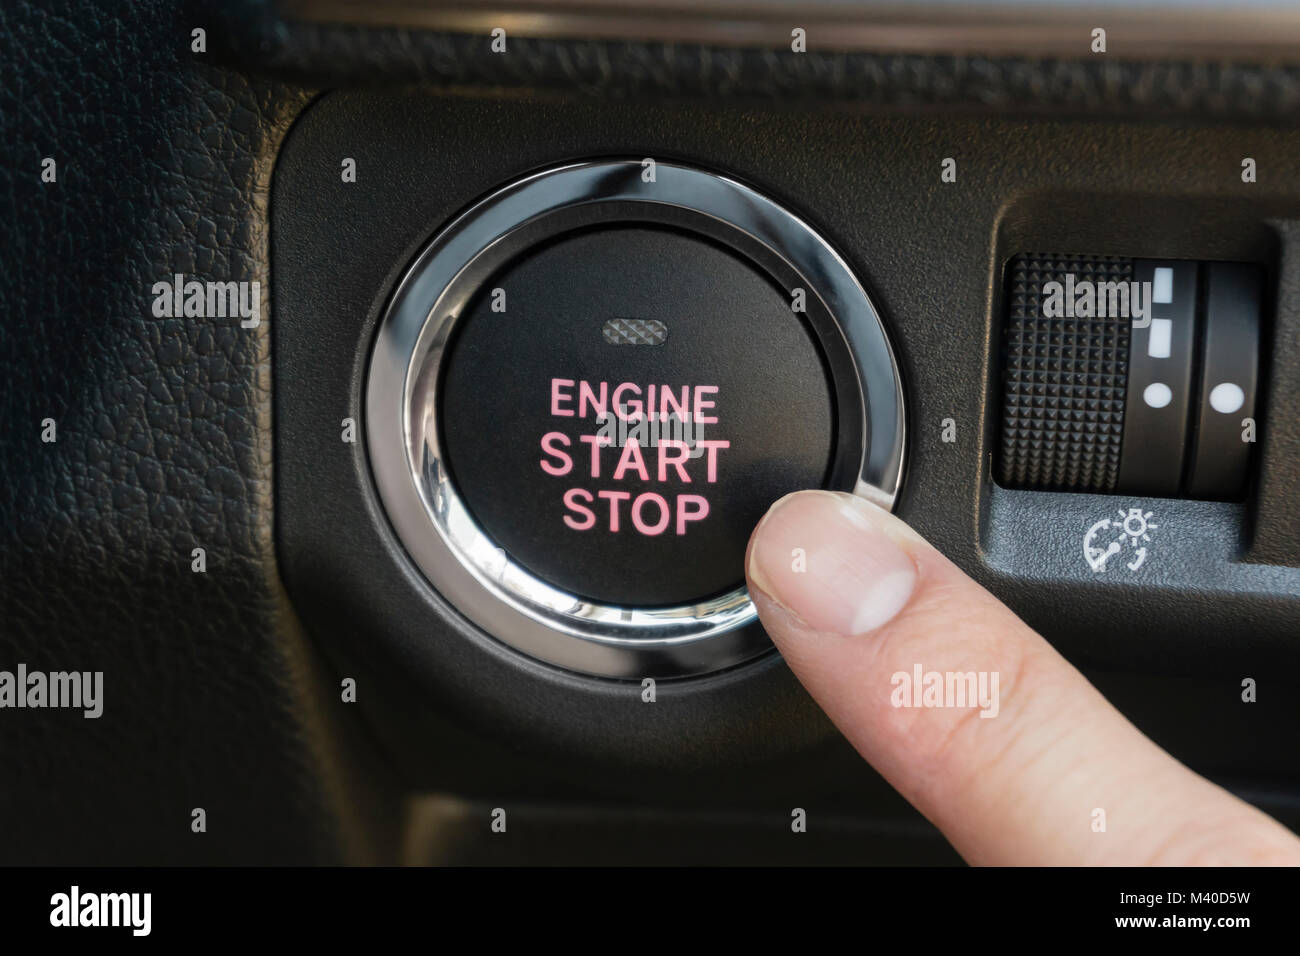 Pushing the engine start stop button of a car Stock Photo